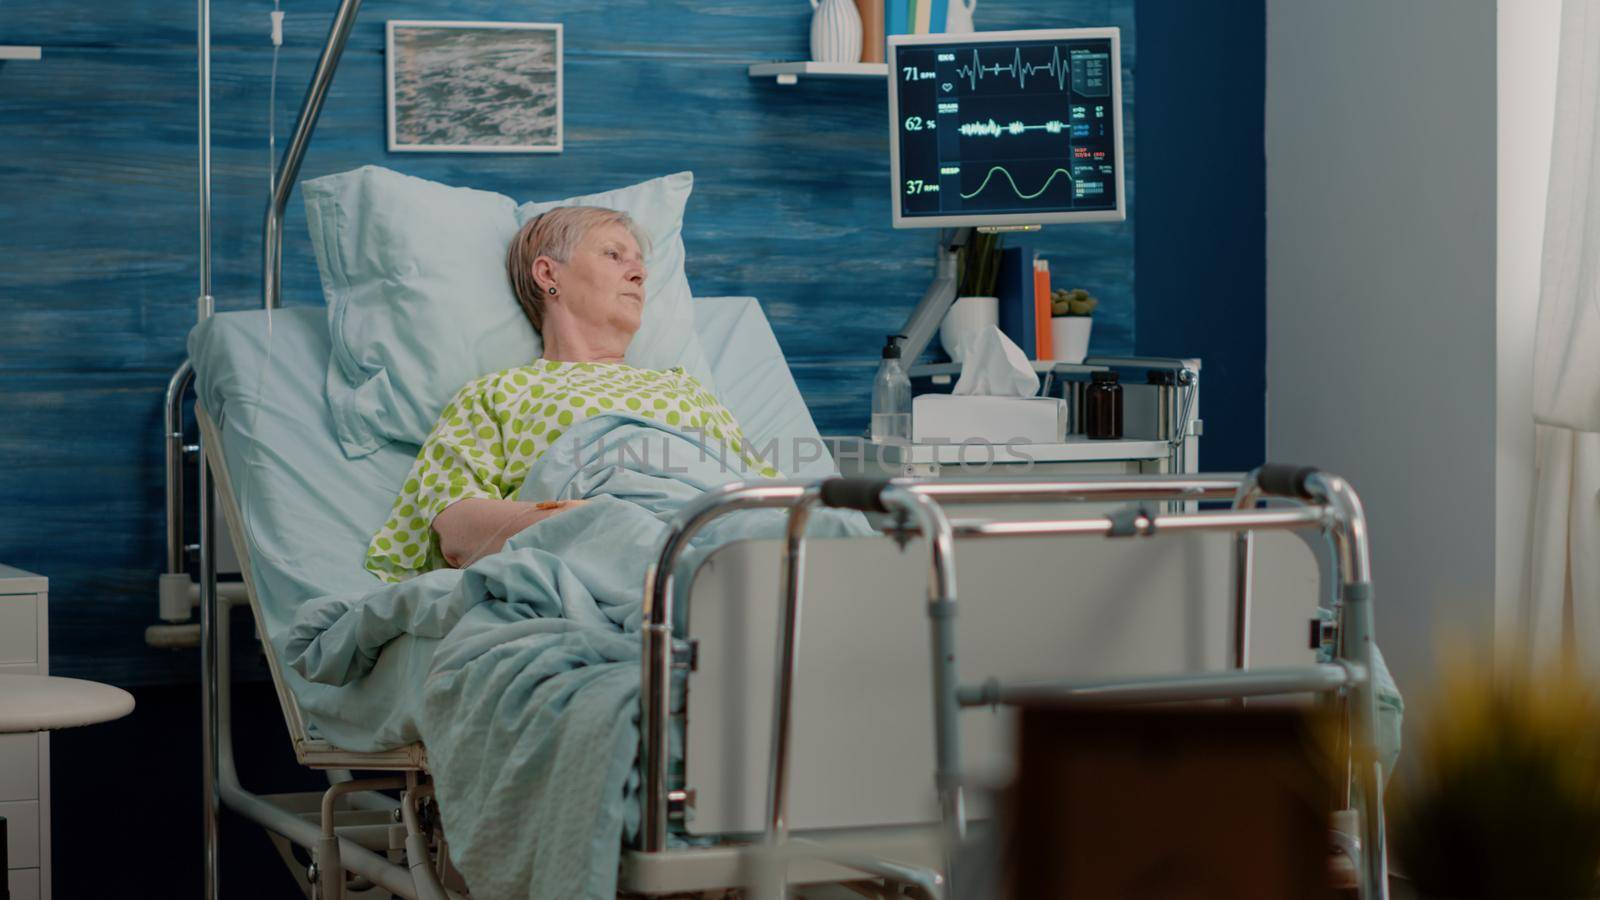 Elder patient with sickness laying in hospital bed by DCStudio